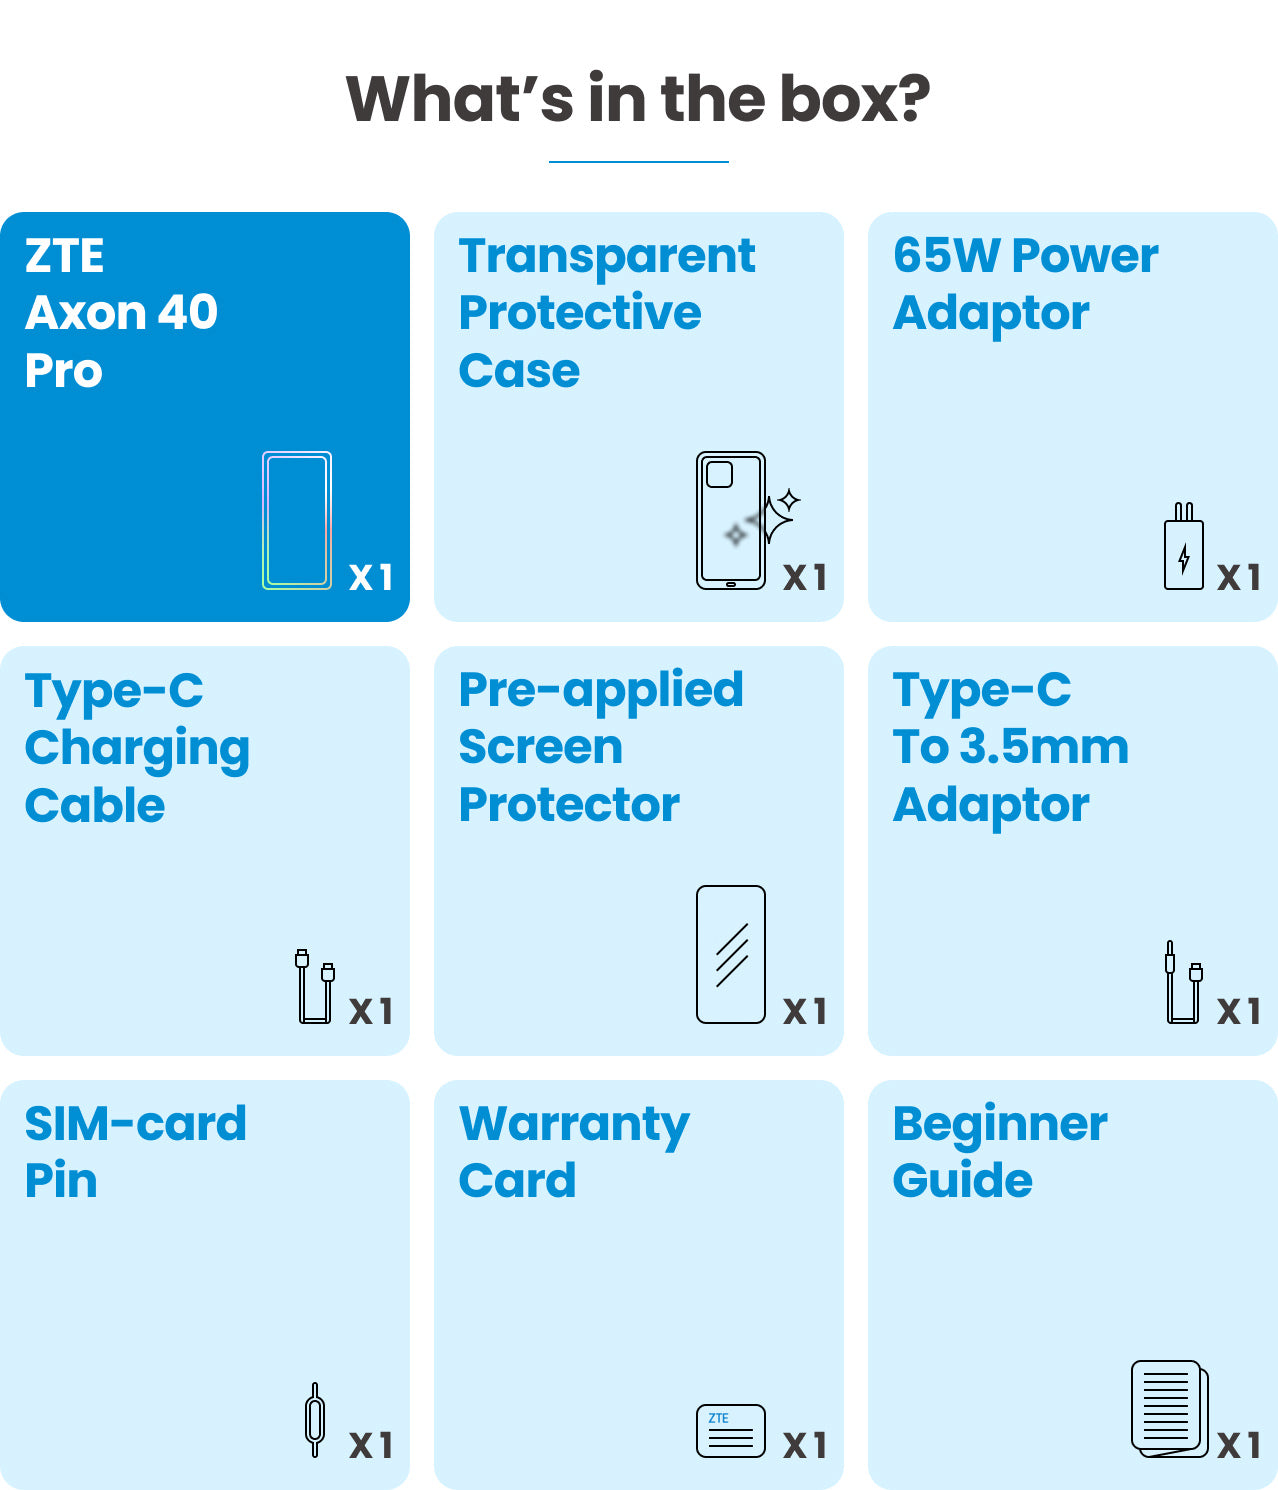 What’s in the box: 1/ One ZTE Axon 40 Pro; 2/ One Transparent Protective Case; 3/One 65W Power Adaptor; 4/One Type-C Charging Cable; 5/ One Pre-applied Screen Protector; 6/ One Type-C to 3.5mm Adaptor; 7/ One SIM-card Pin; 8/ One Warranty Card; 9/ One Beginner Guide